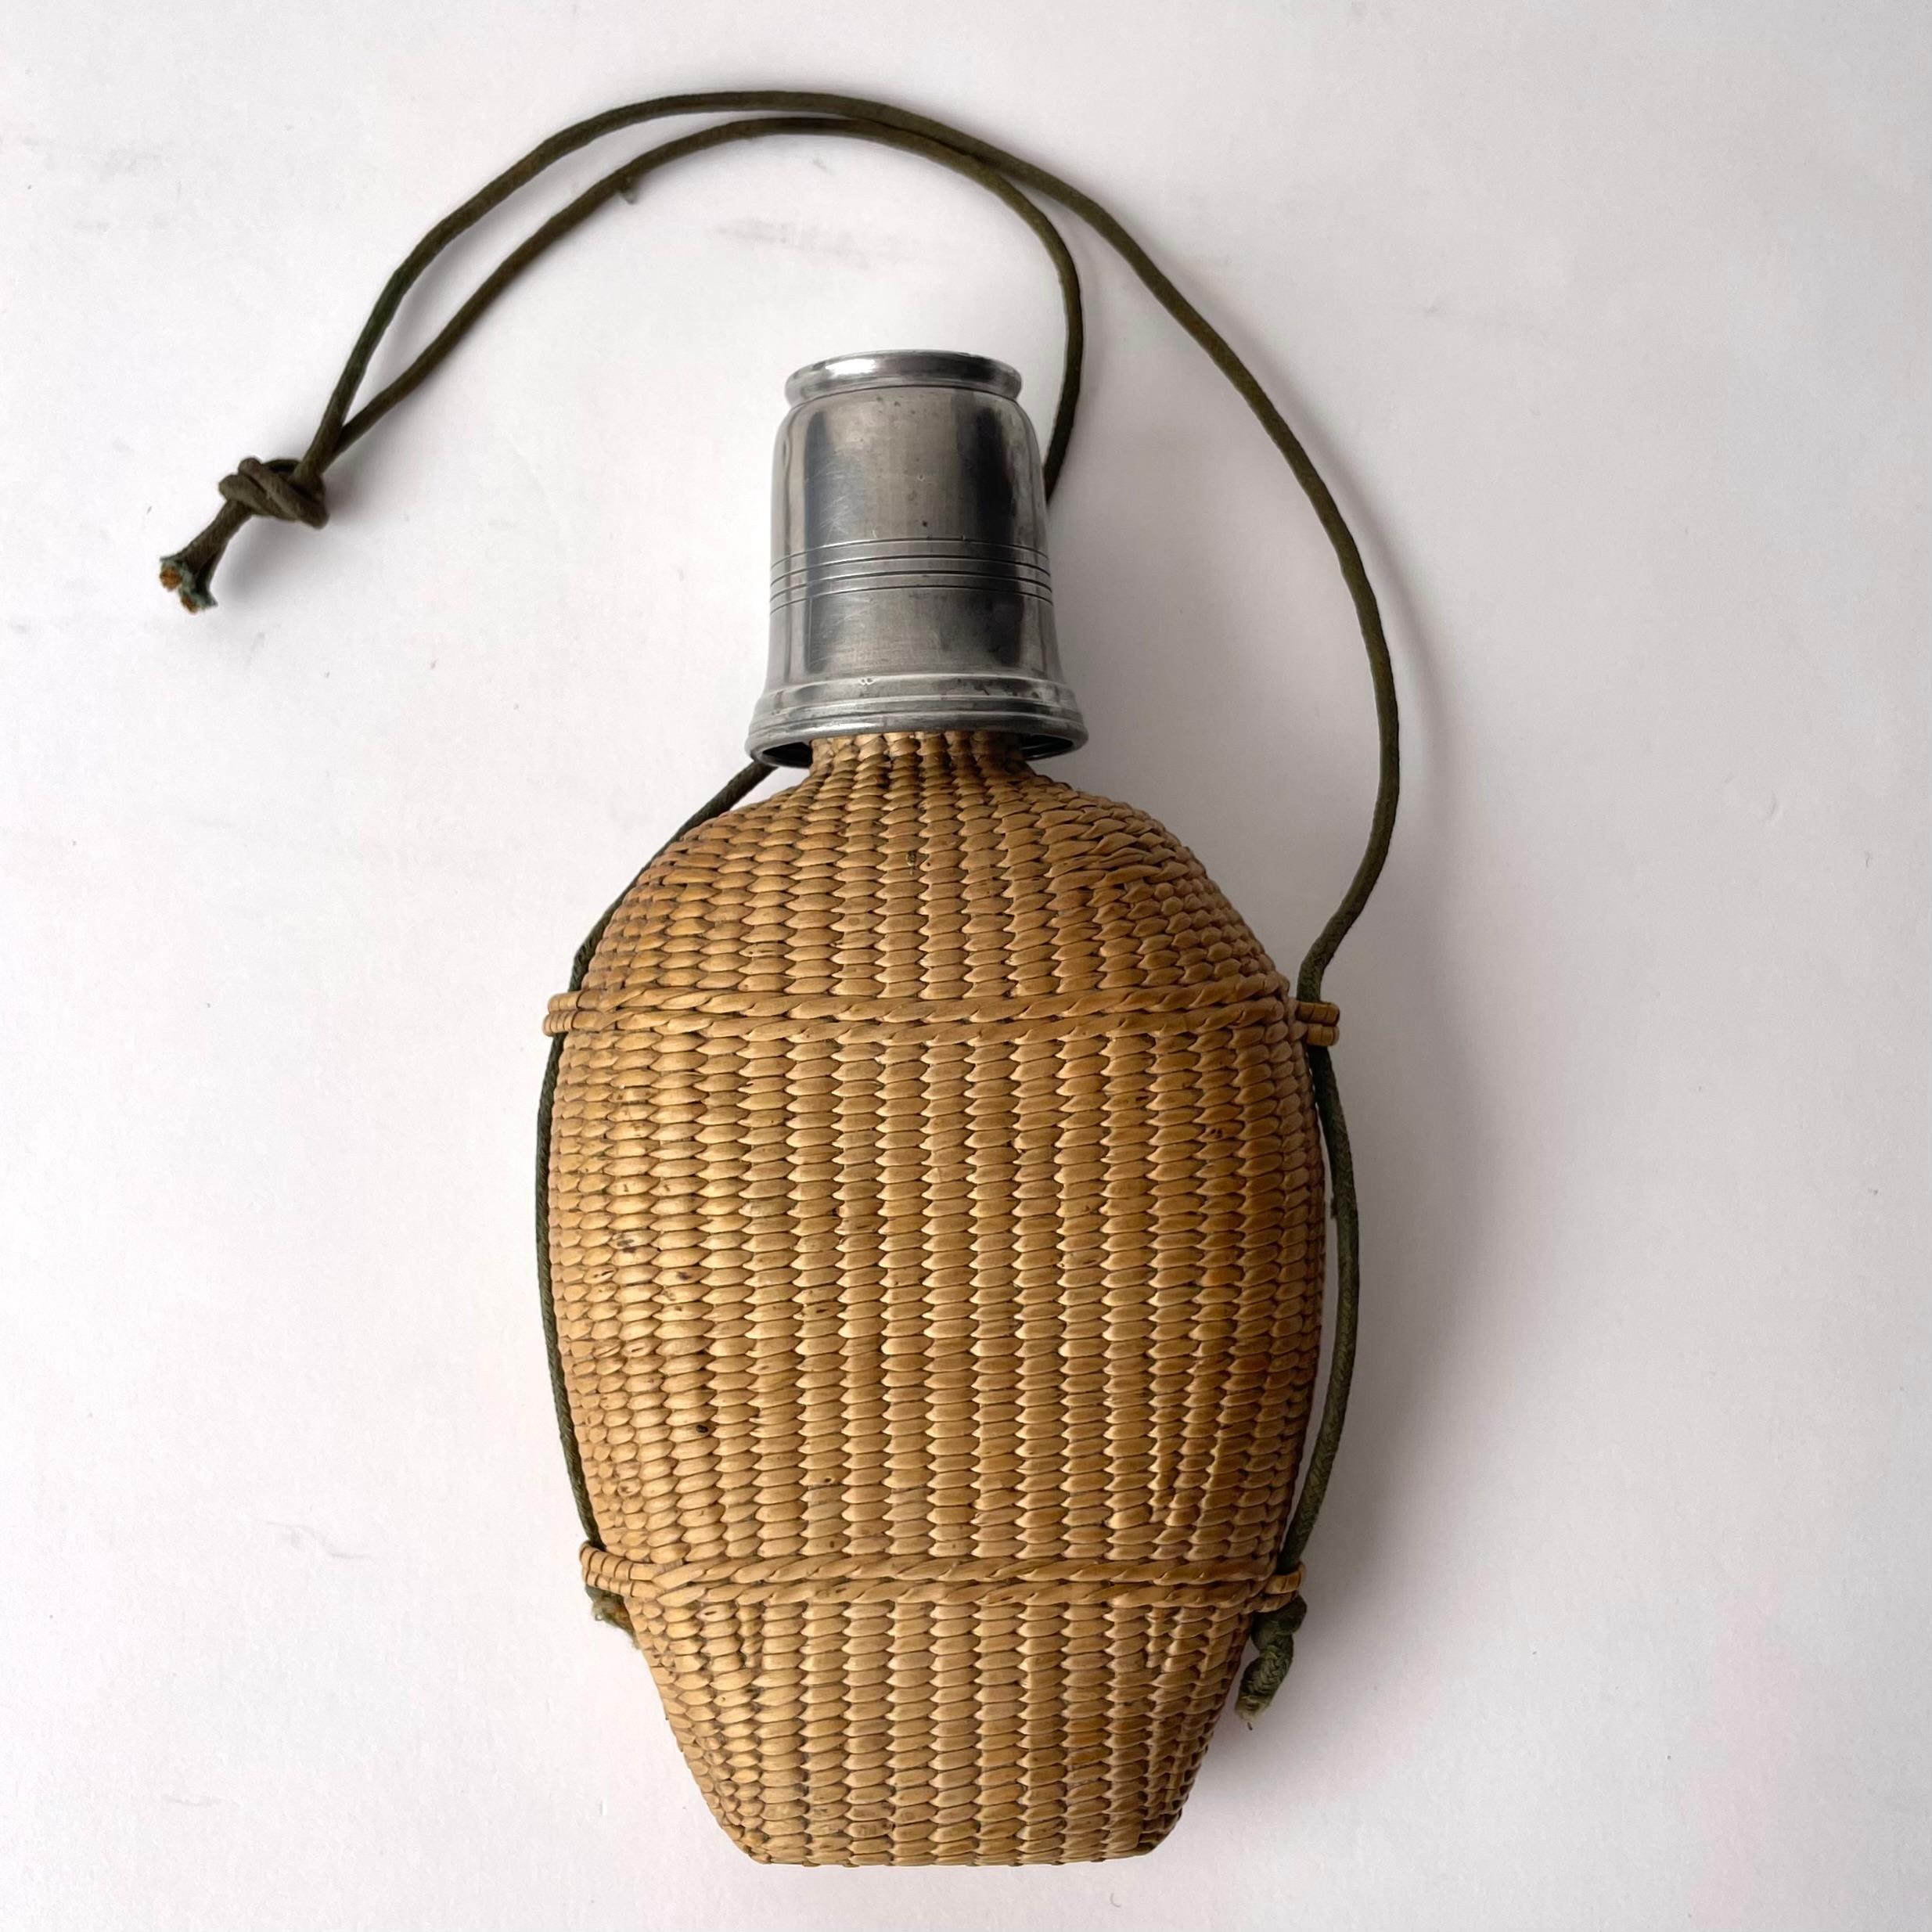 Safari Canteen Bottle, Rattan, Glass and Tin, probably late 19th C/early 20th C

A charming canteen bottle or flask, inspired by the fashion and style of safari and tropical exploration. The bottle is encased in a beautiful rattan covering, and